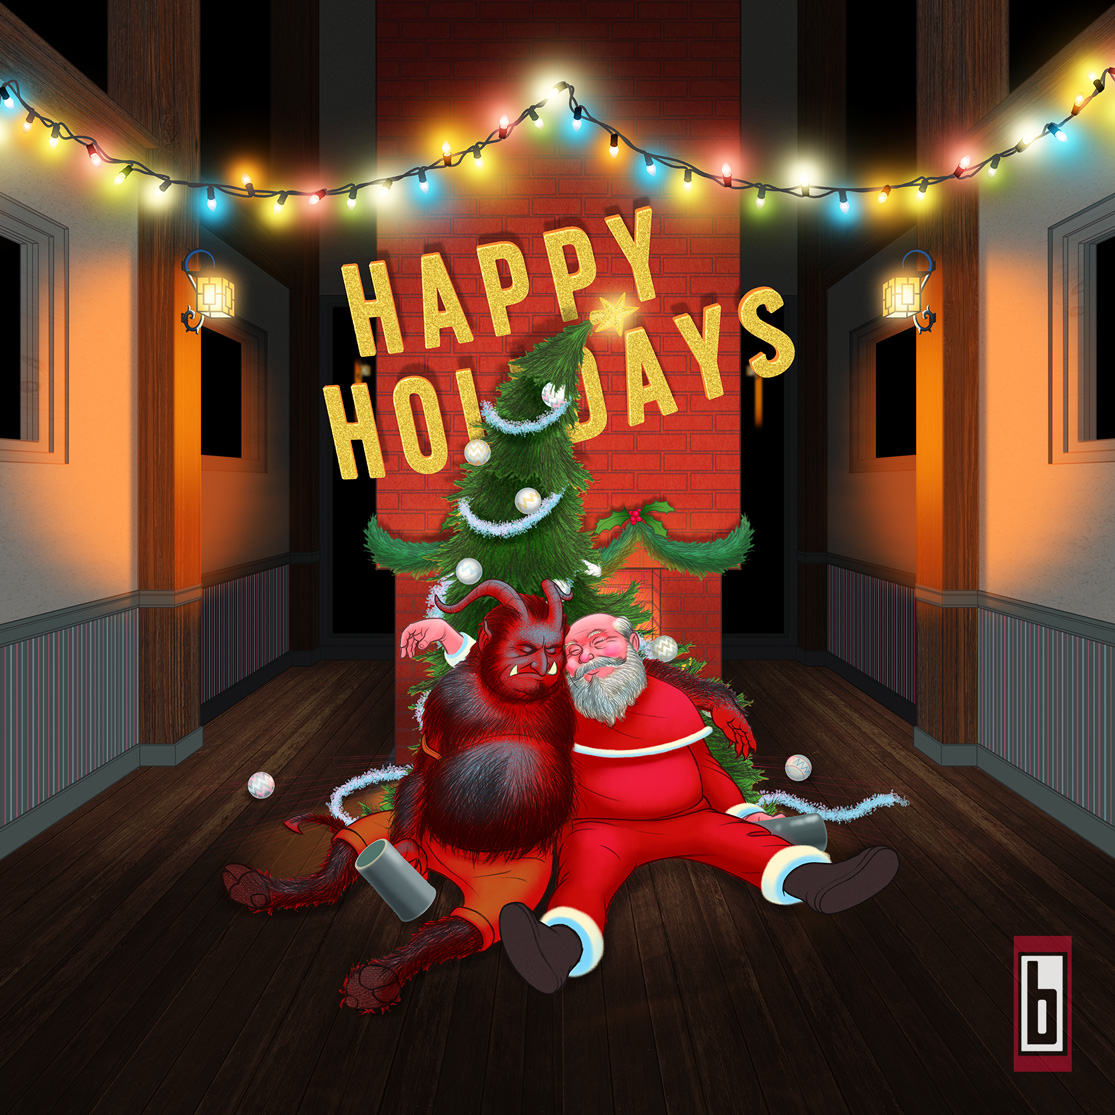 Krampus & Kringle passed out on a Christmas Tree in front of Fireplace full image